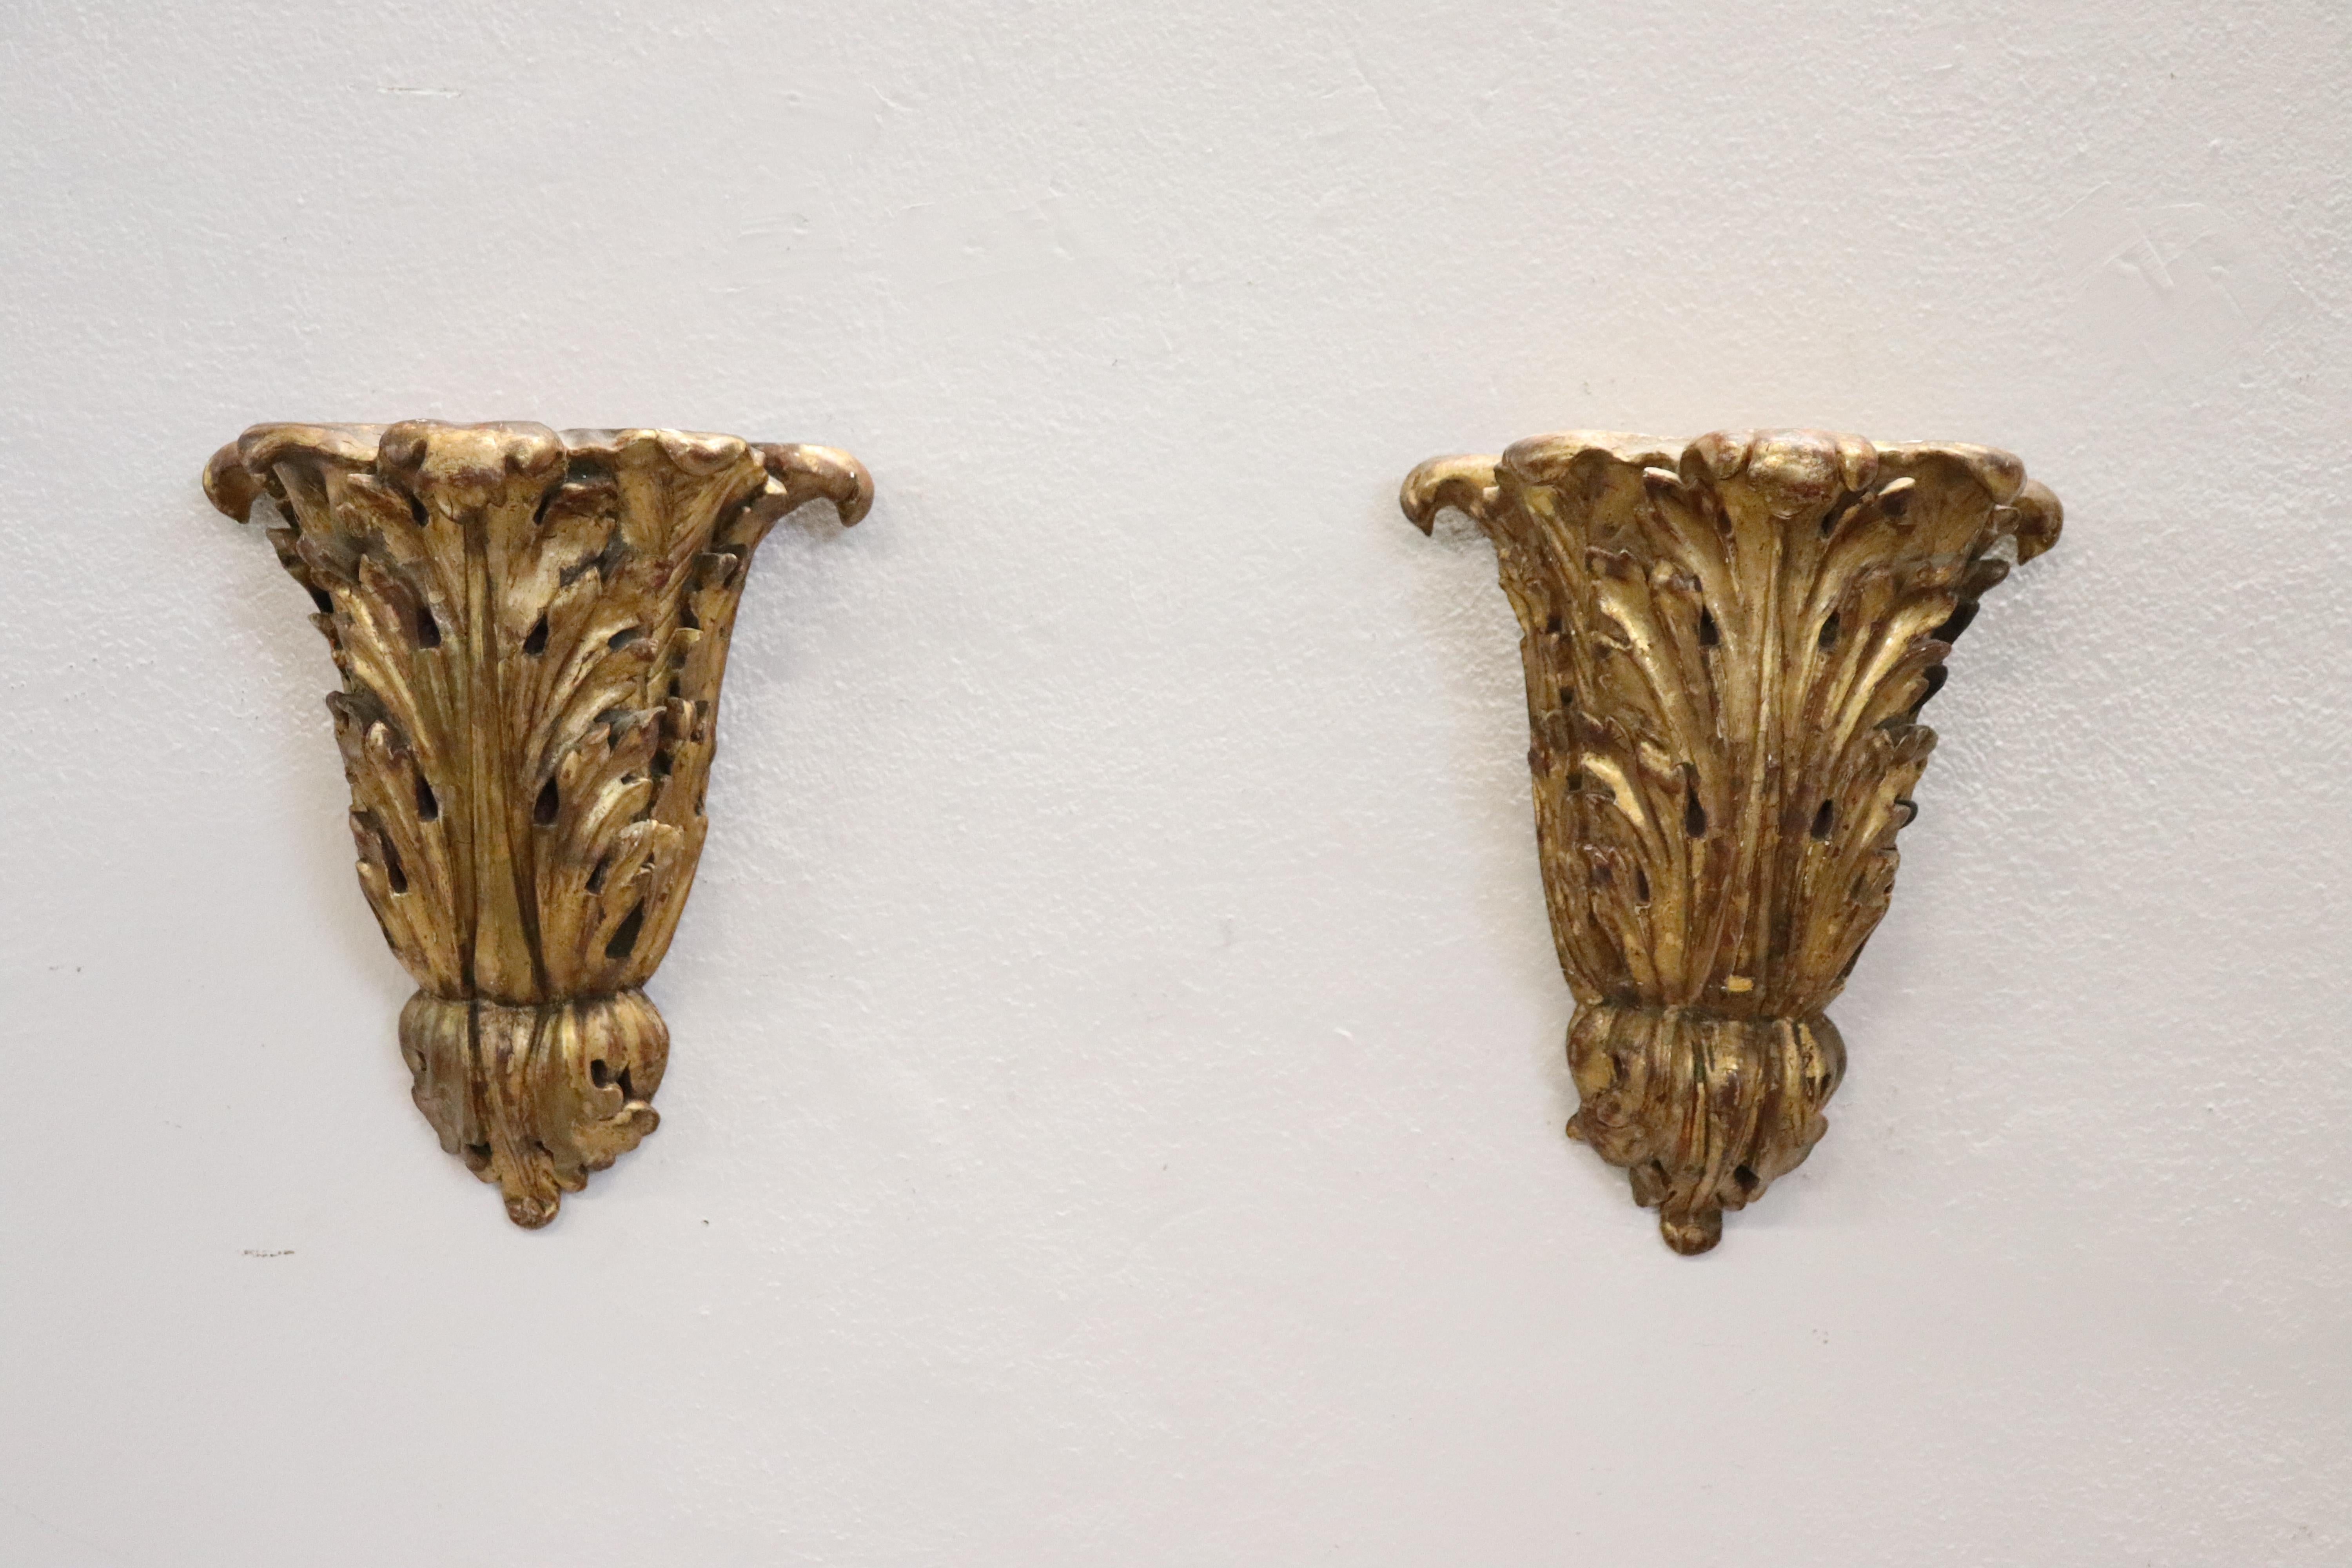 Beautiful 19th century carved and gilded wood pair of pair of antique friezes. Featuring large acanthus leaves carved into the wood. In antique good conditions.